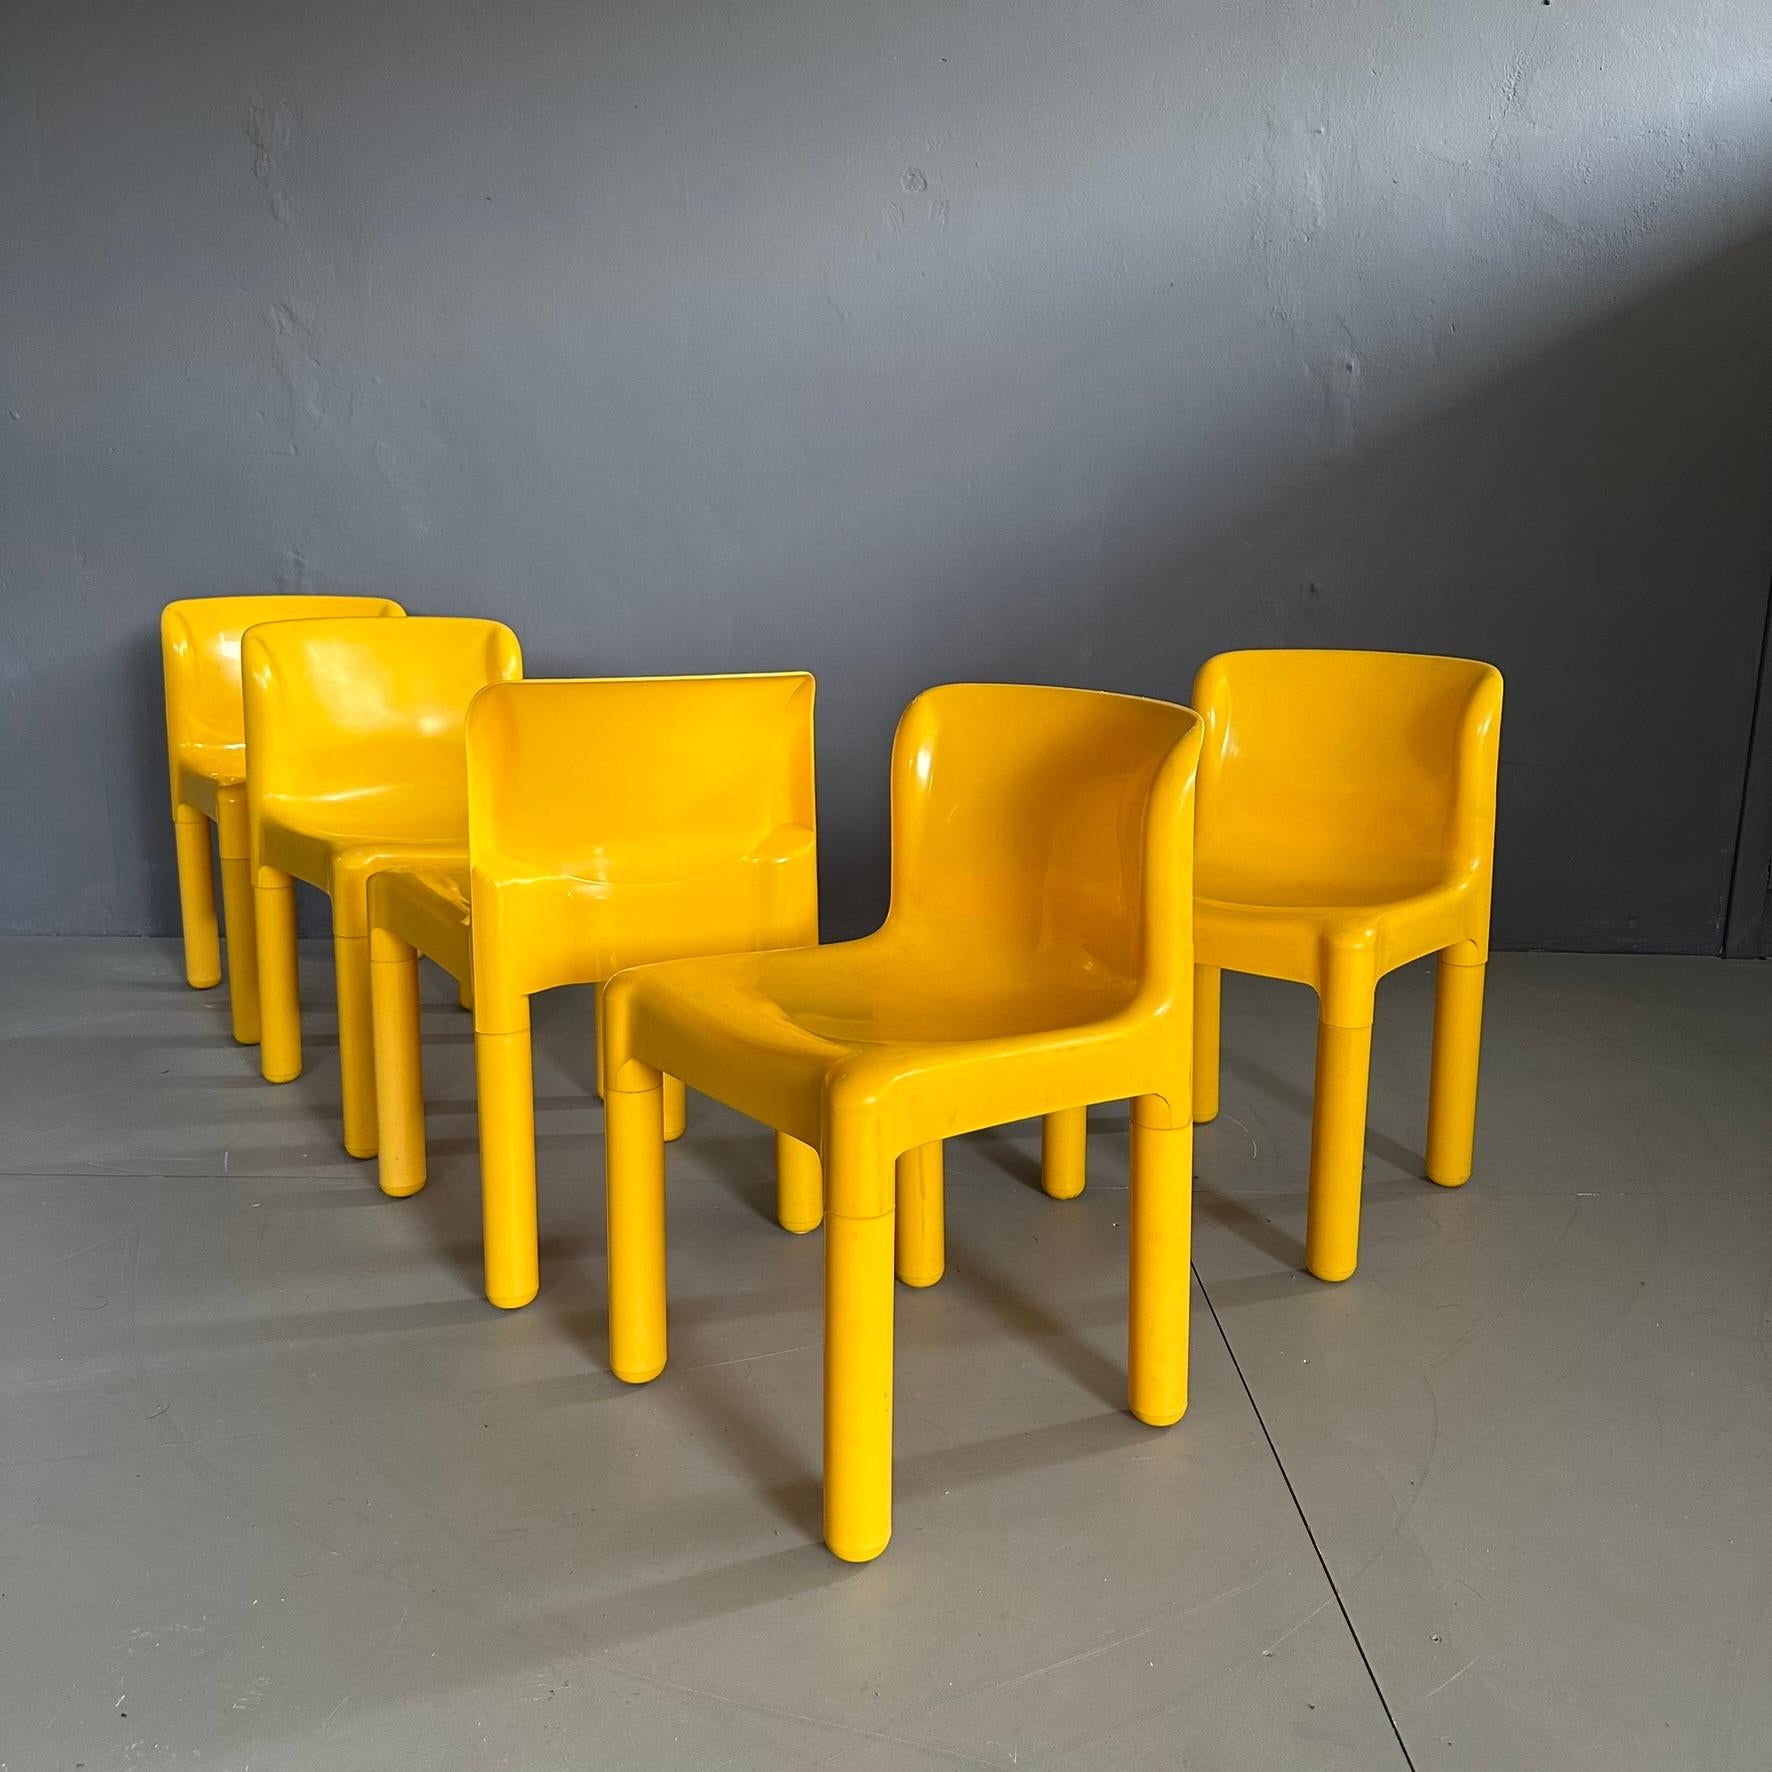 Set of five chairs mod. 4875 designed by Carlo Bartoli for Kartell in the Seventies.
Bright yellow plastic chairs.
The legs are with removable legs.
The authenticity mark is imprinted under the seat..

